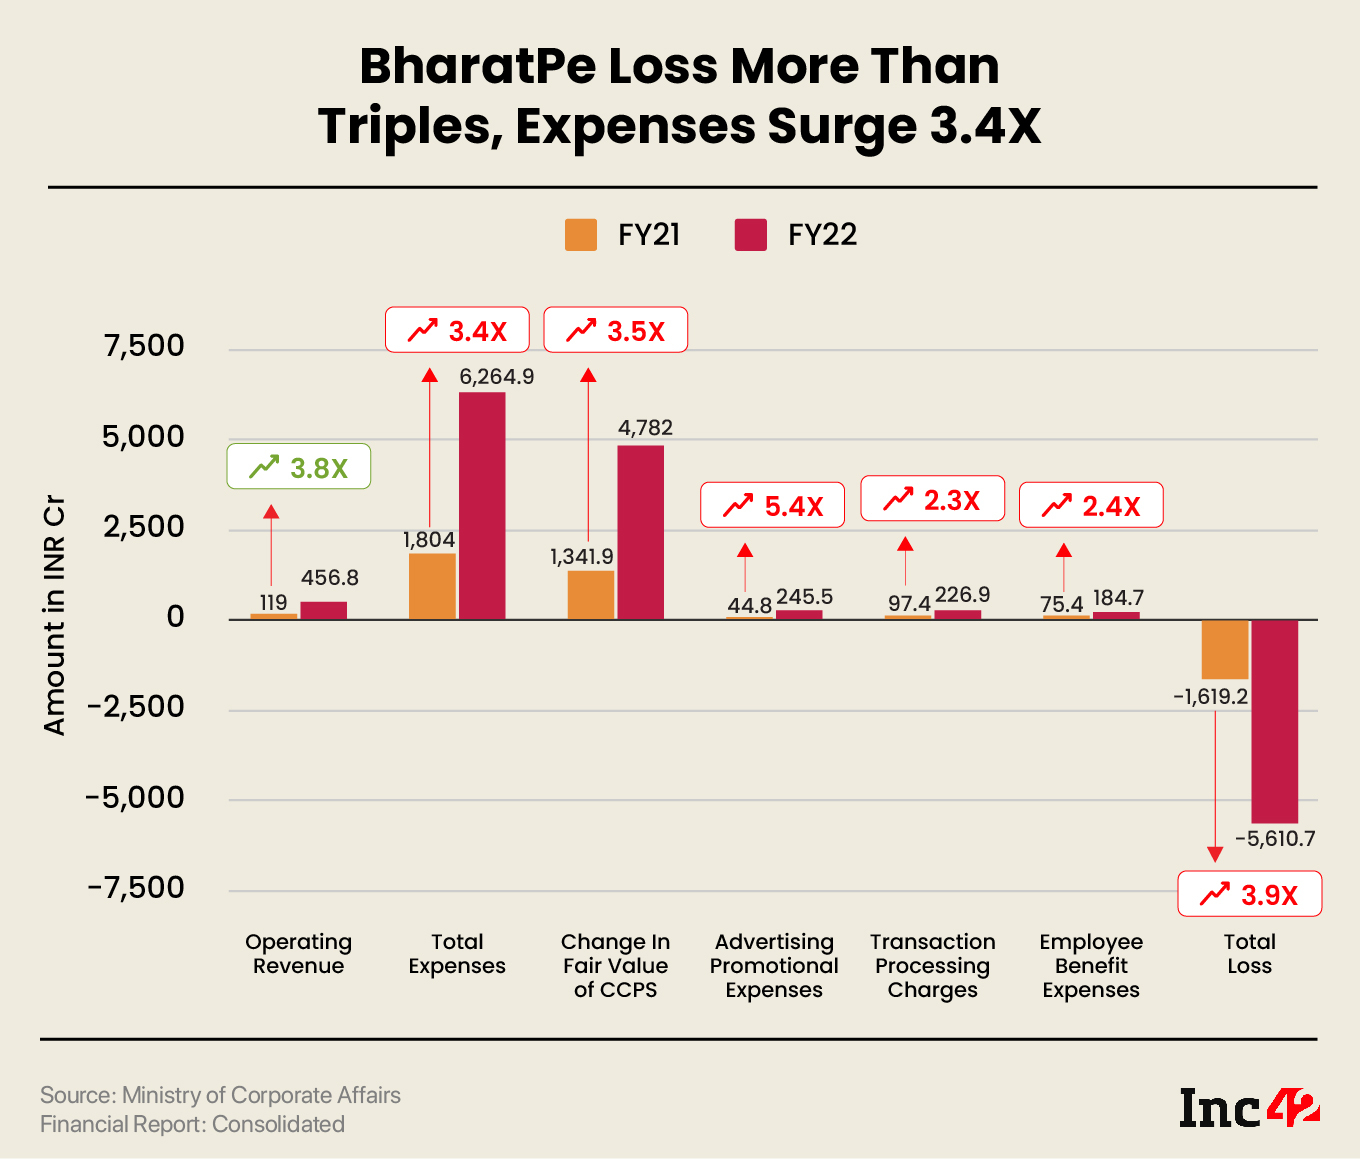 Change In Fair Value Of CCPS Bites BharatPe, FY22 Loss More Than Triples To INR 5,610.7 Cr